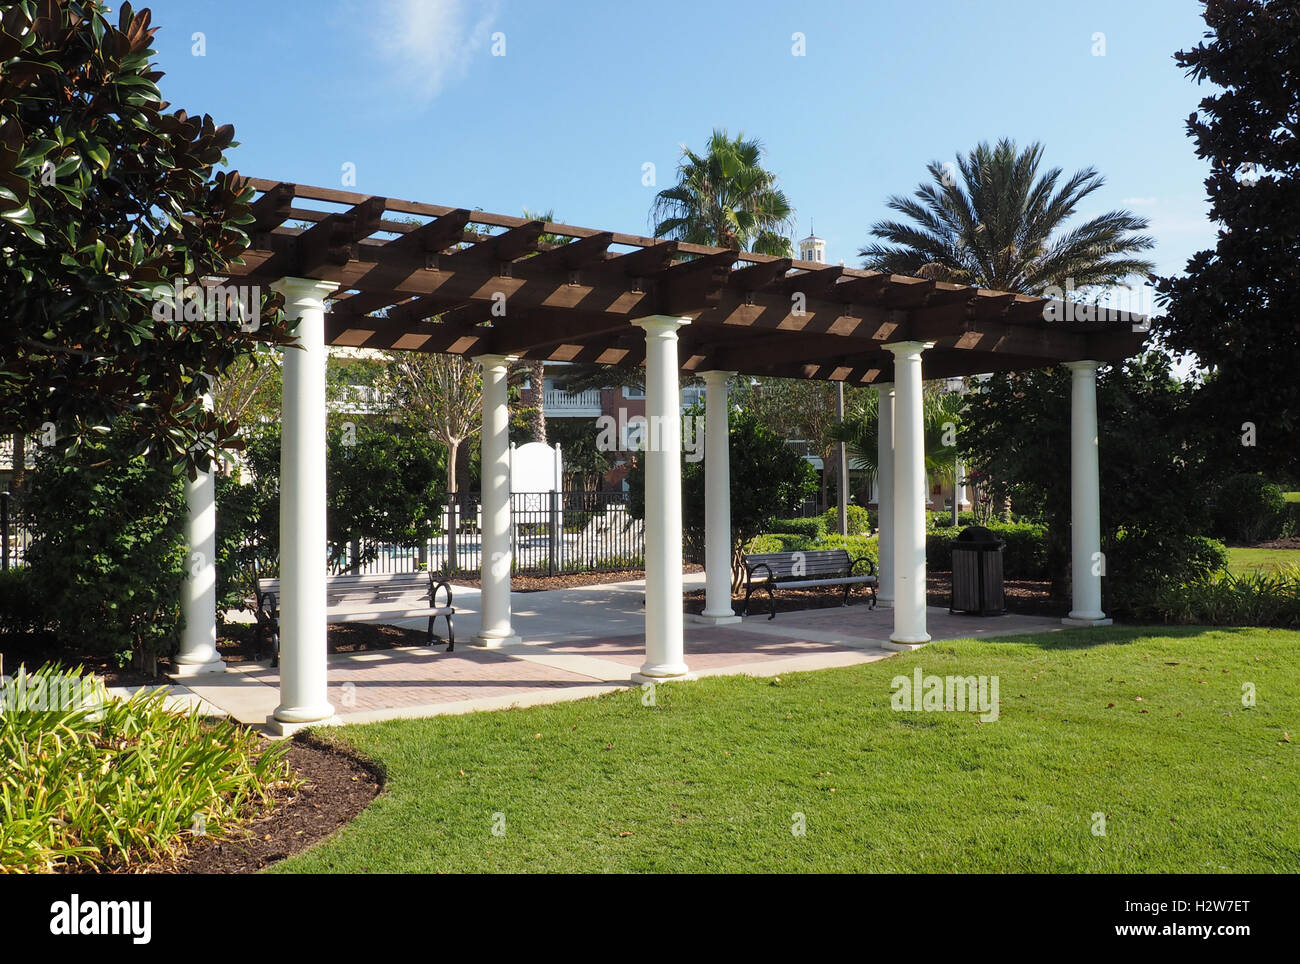 outdoor pavilion with a wood roof and columns.  There are benches under the pavilion and it is surrounded by lush vegitation Stock Photo